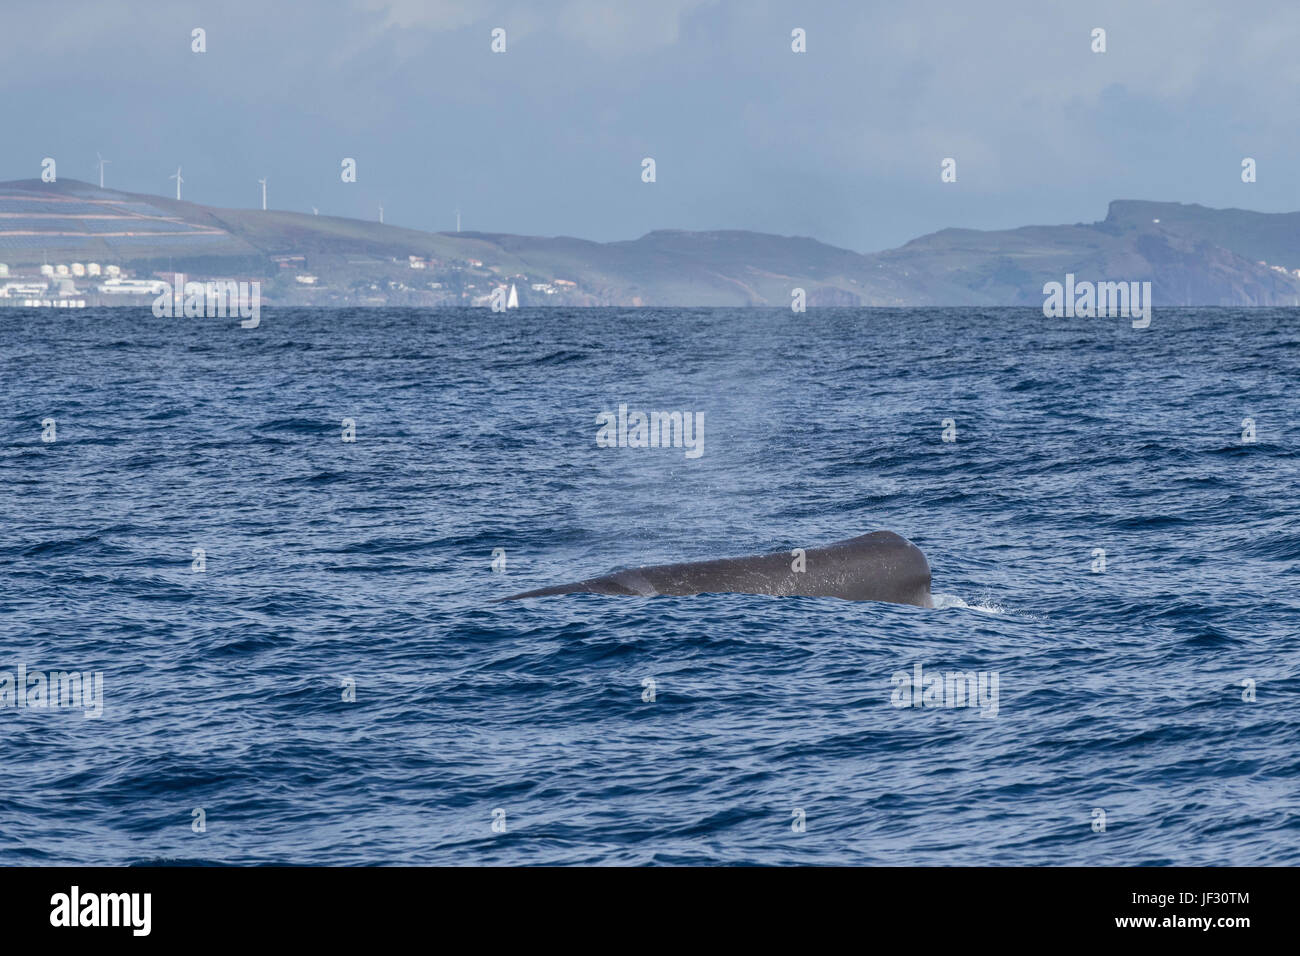 Female Sperm Whale, Physeter macrocephalus, or cachalot,surfacing with head showing, in front of Funchal, Madeira, North Atlantic Ocean Stock Photo